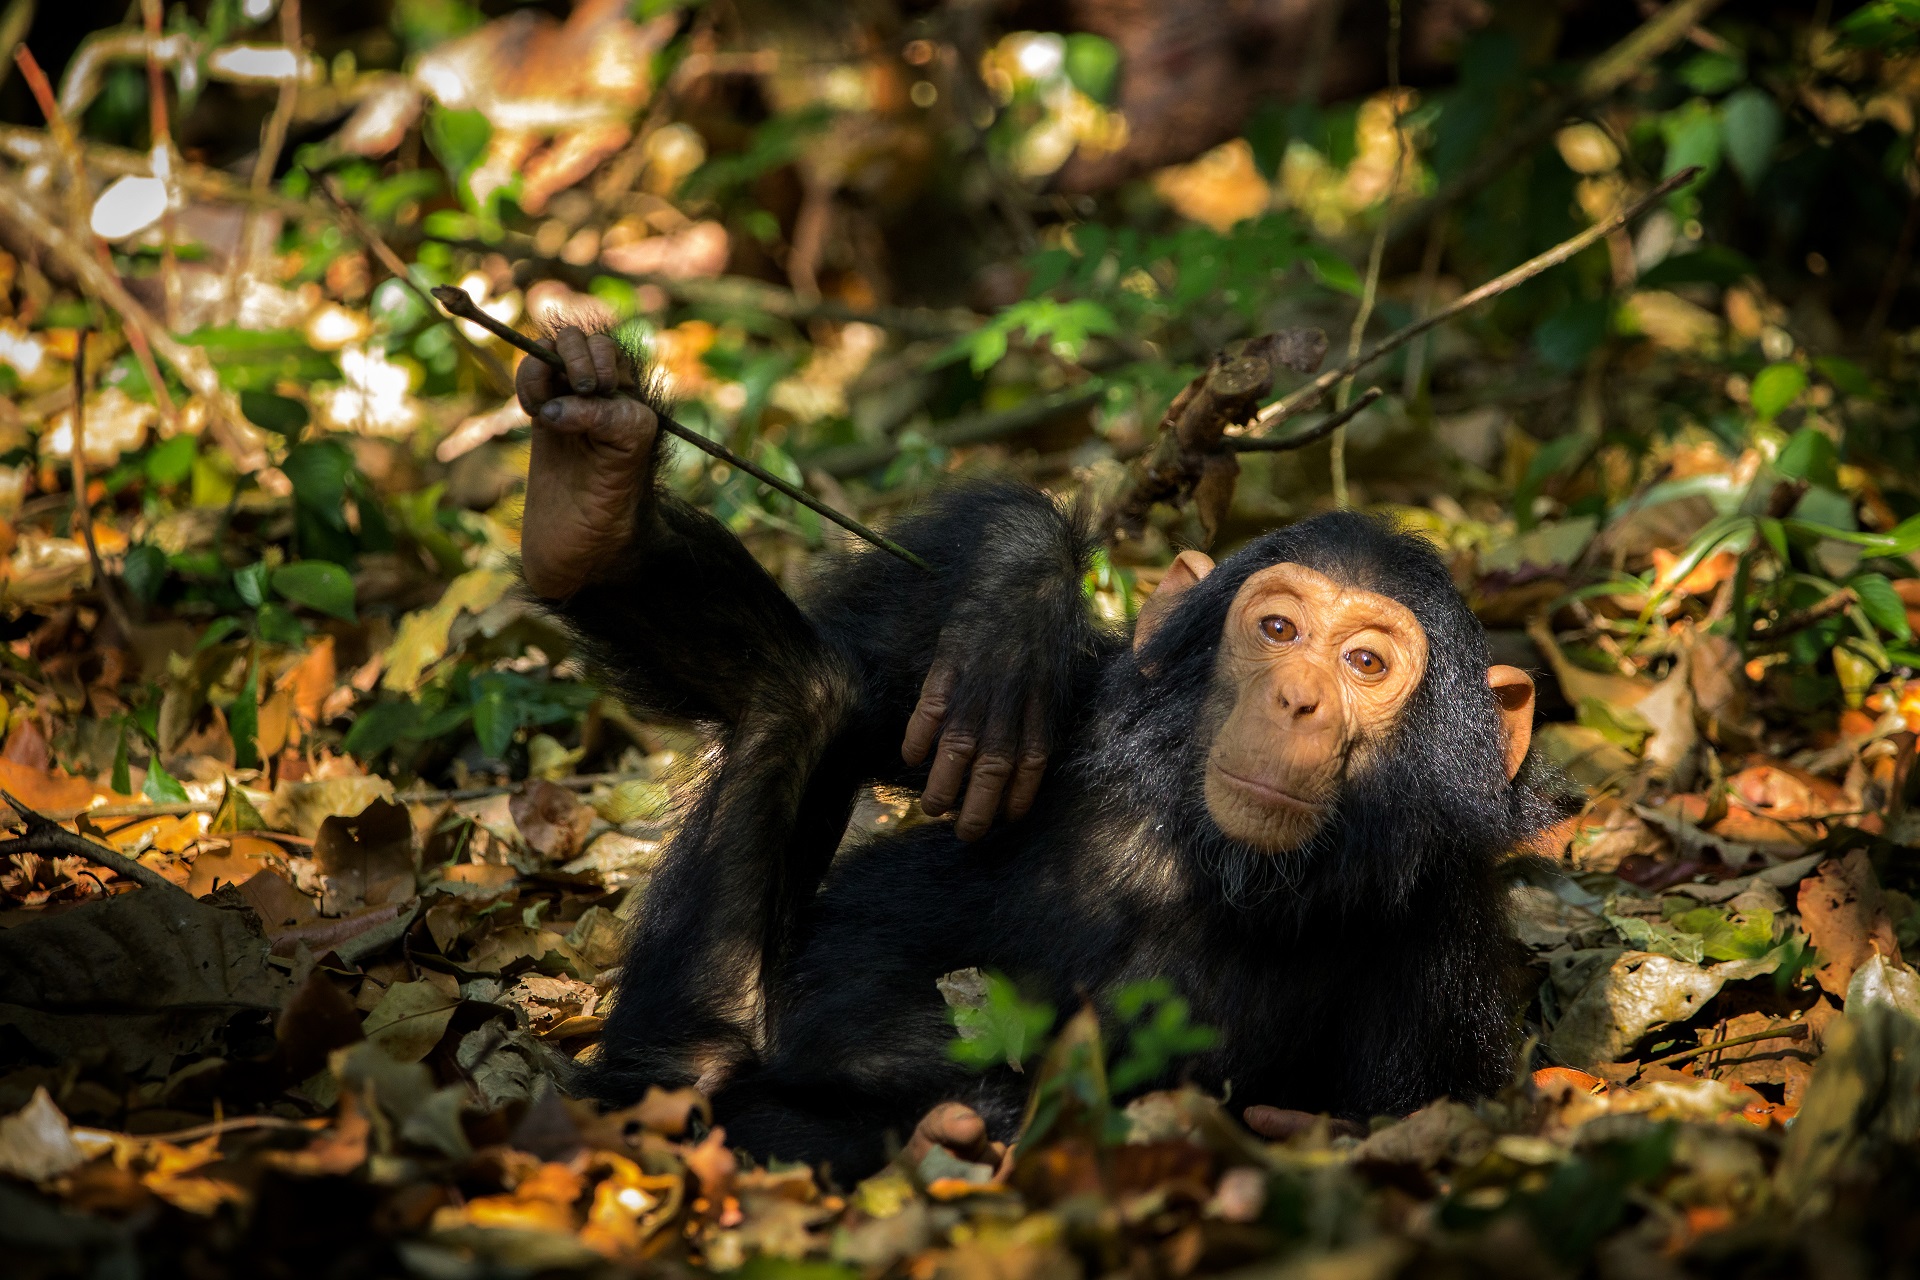 Young chimp named Ozzie in the Budongo forest in Uganda

IMAGE: Sian Addison 2019